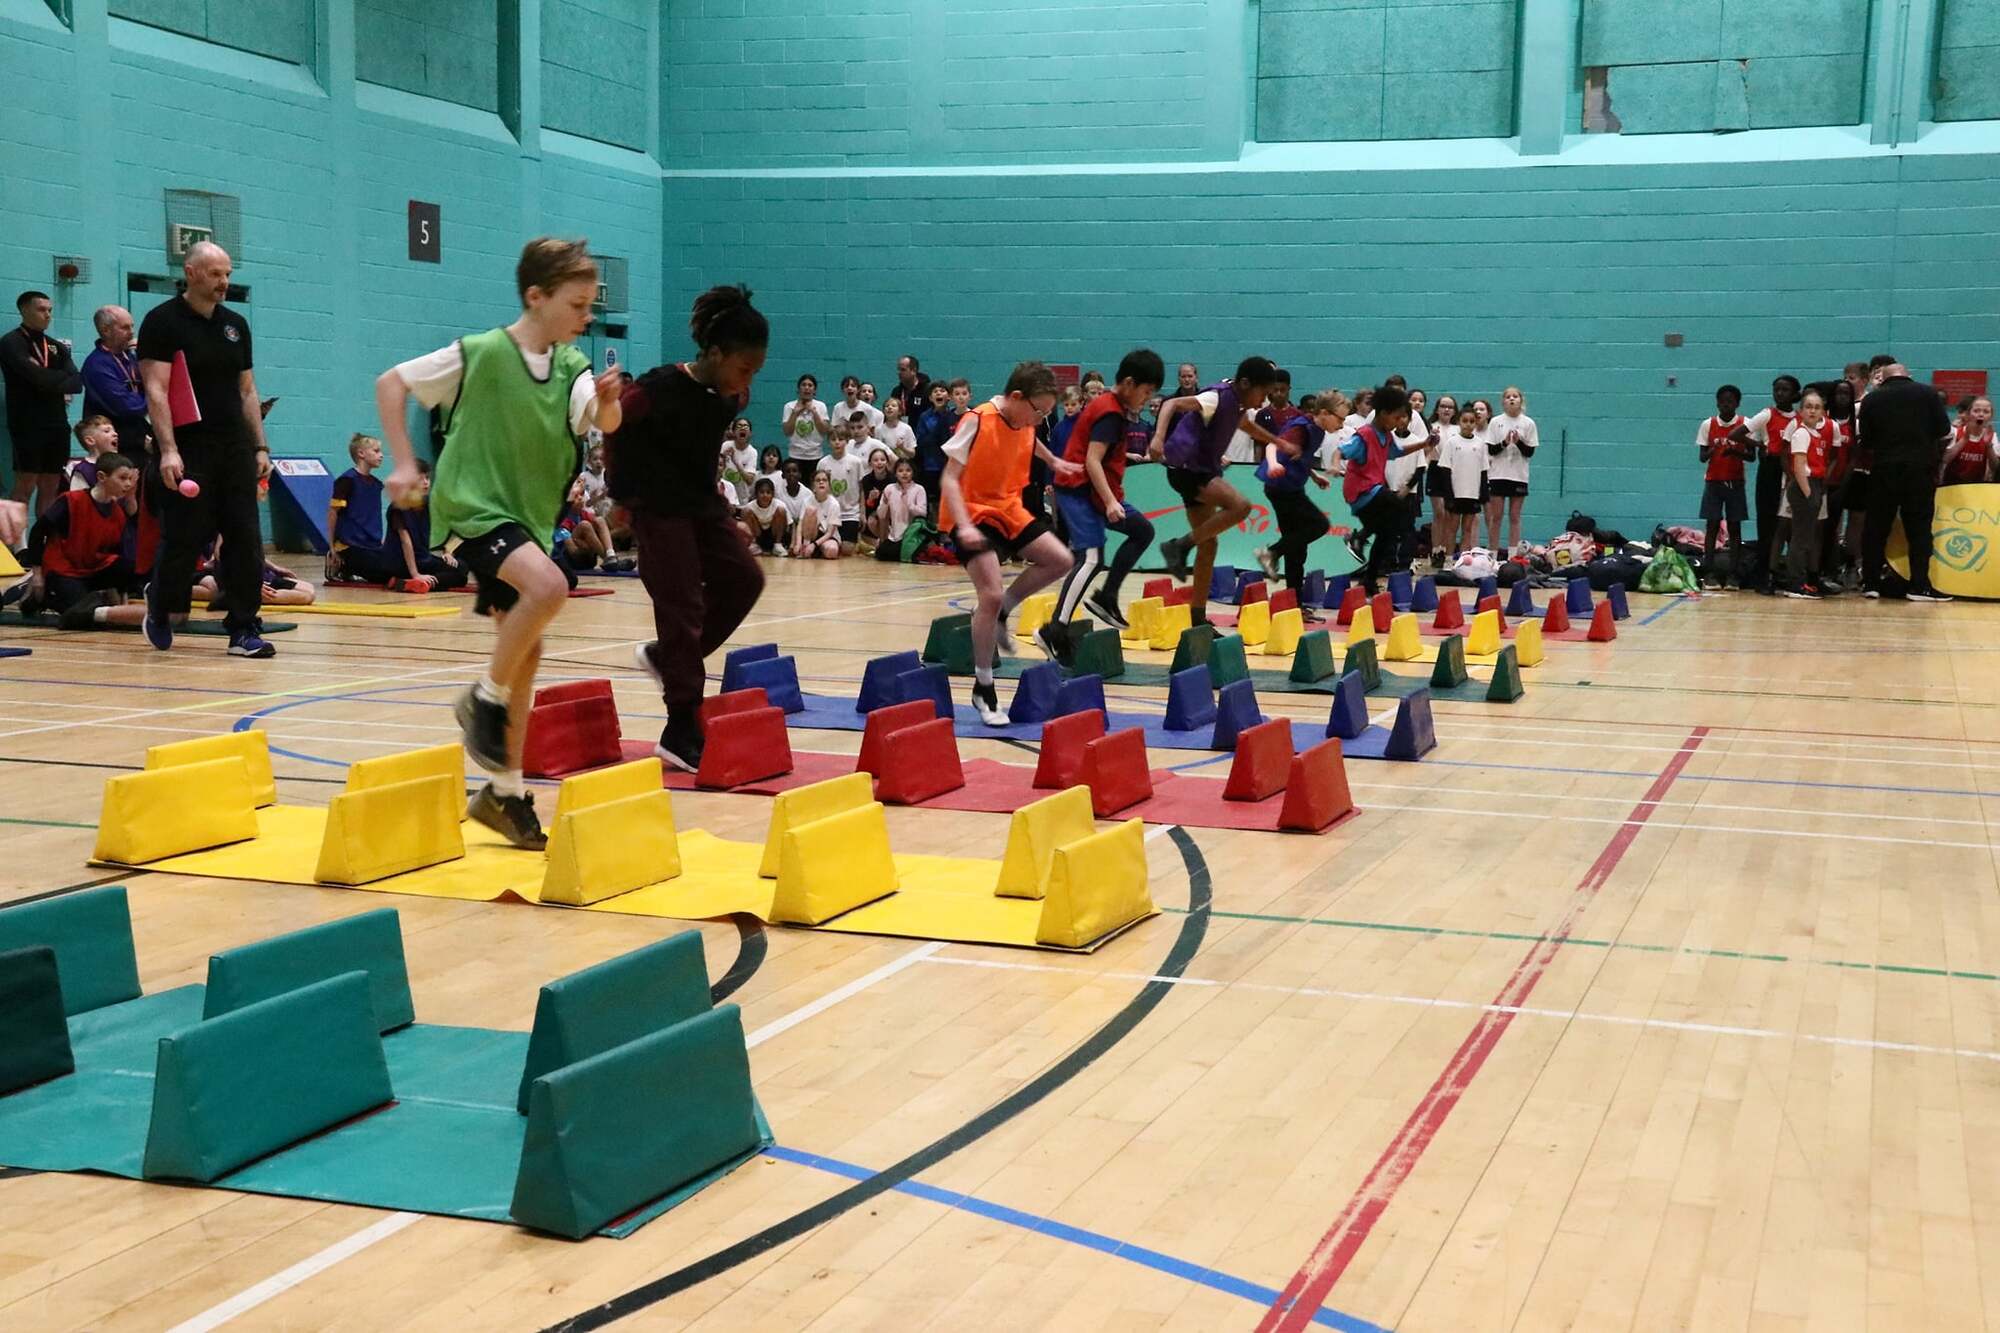 Children playing with blocks on a gym floor.